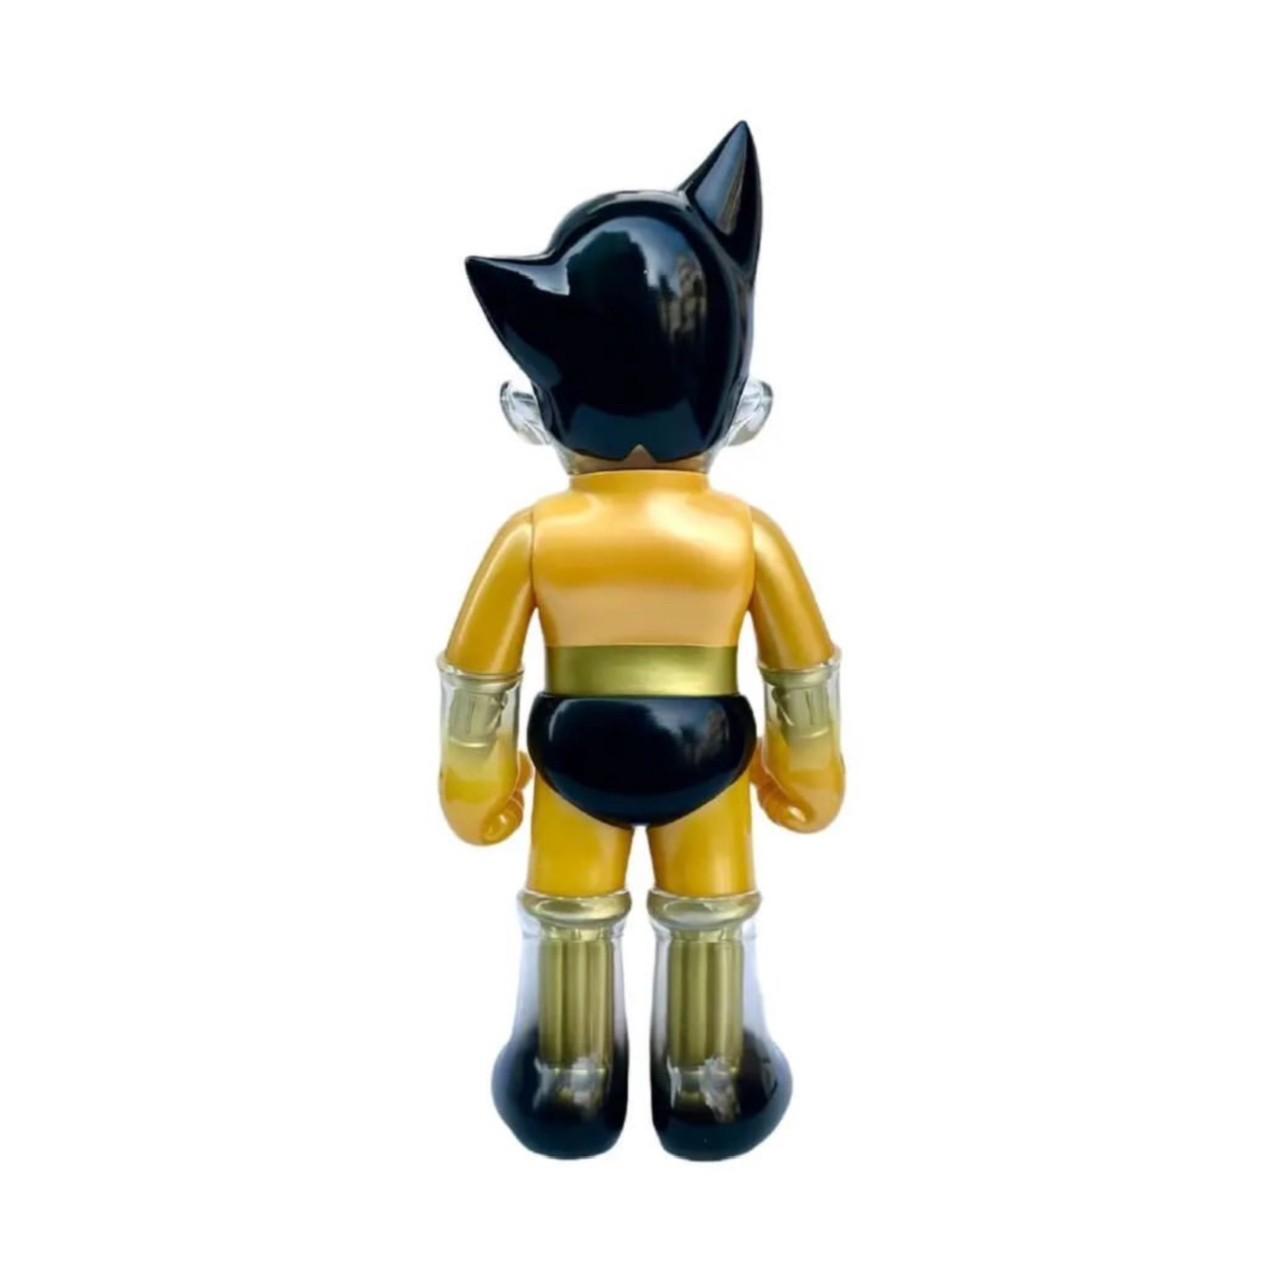 Middle Scale Astro Boy 鉄腕アトム GOLD Ver.